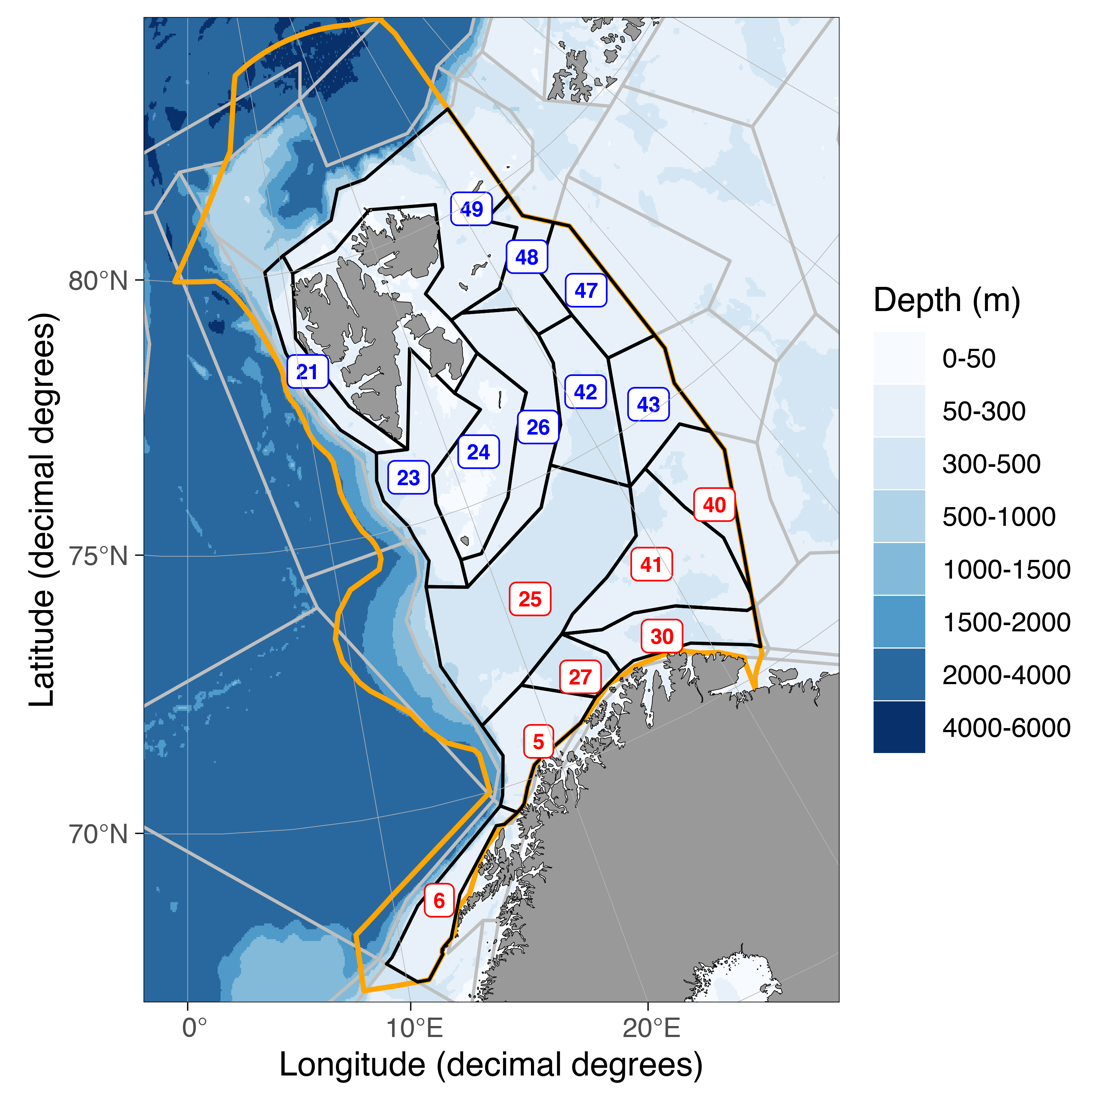 Figure 3.1: Map of the spatial extent of the panel-based assessment of ecosystem condition of the Arctic and Sub-Arctic Barents Sea. Black lines delimit the Atlantis polygons (Hansen et al., 2016). The Arctic part is defined by the blue polygons. The Sub-Arctic part is defined by the red polygons.